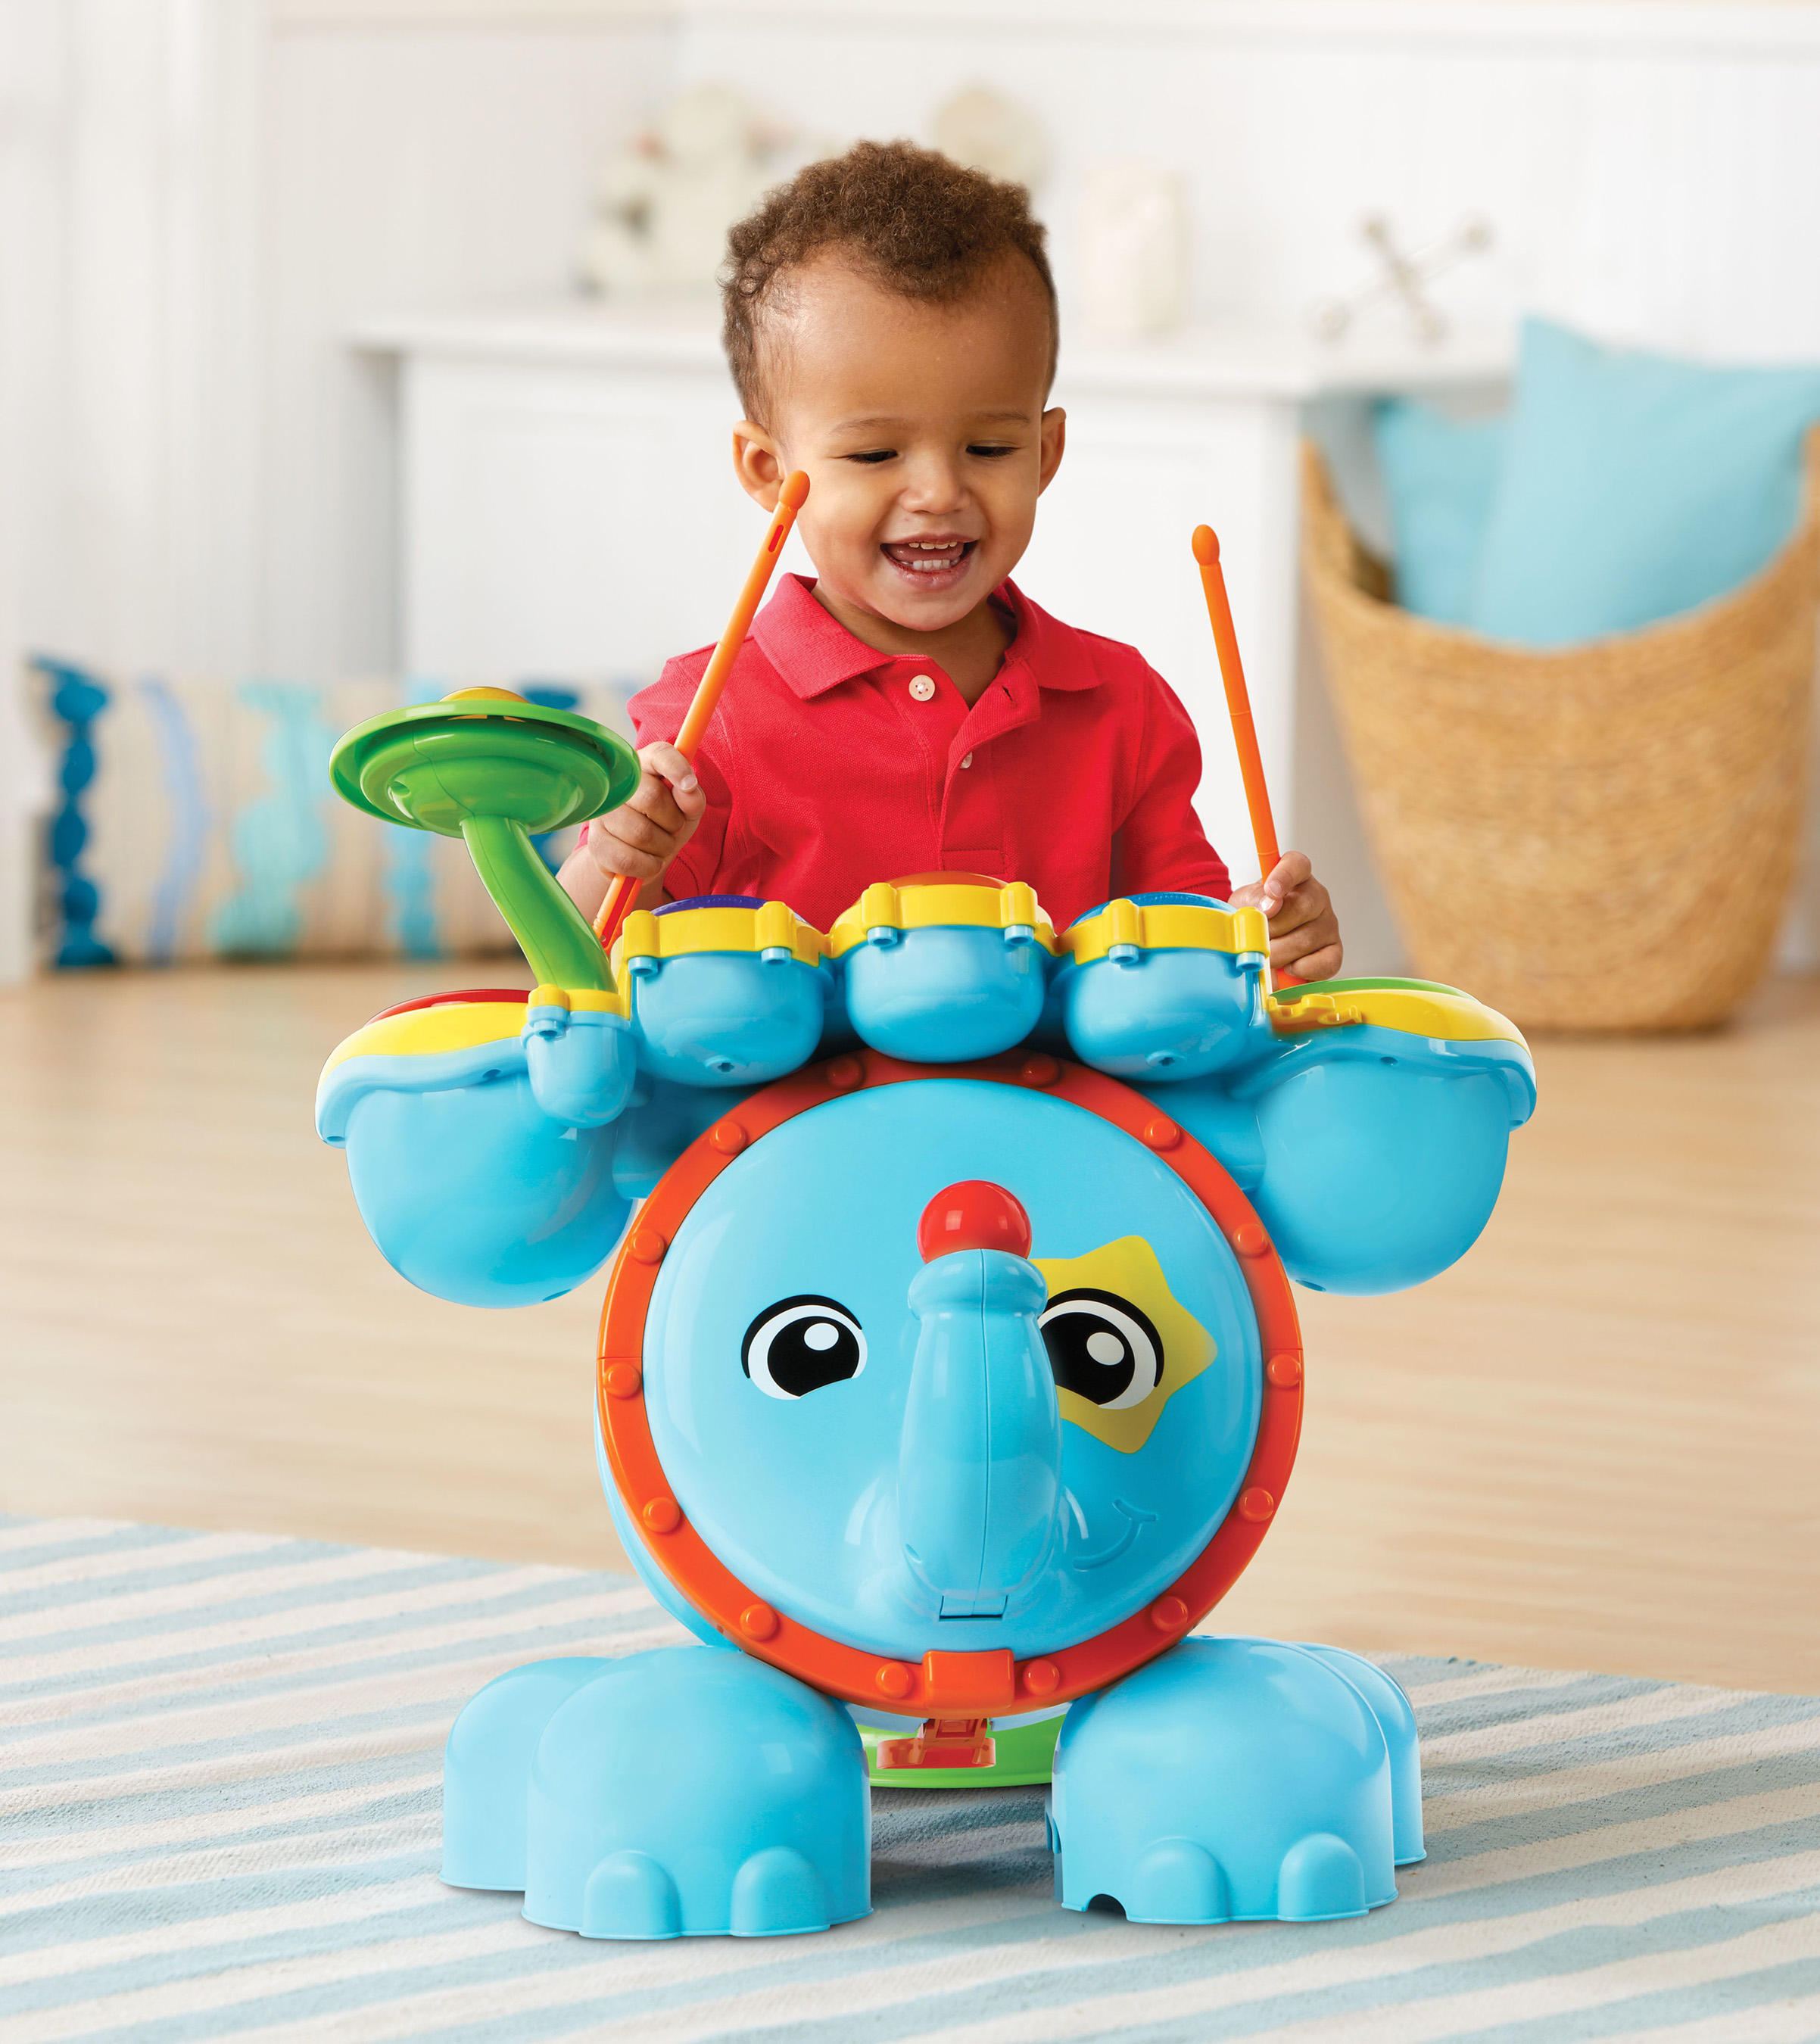 New Baby, Infant, Toddler and Preschool Collections from VTech® Available Now